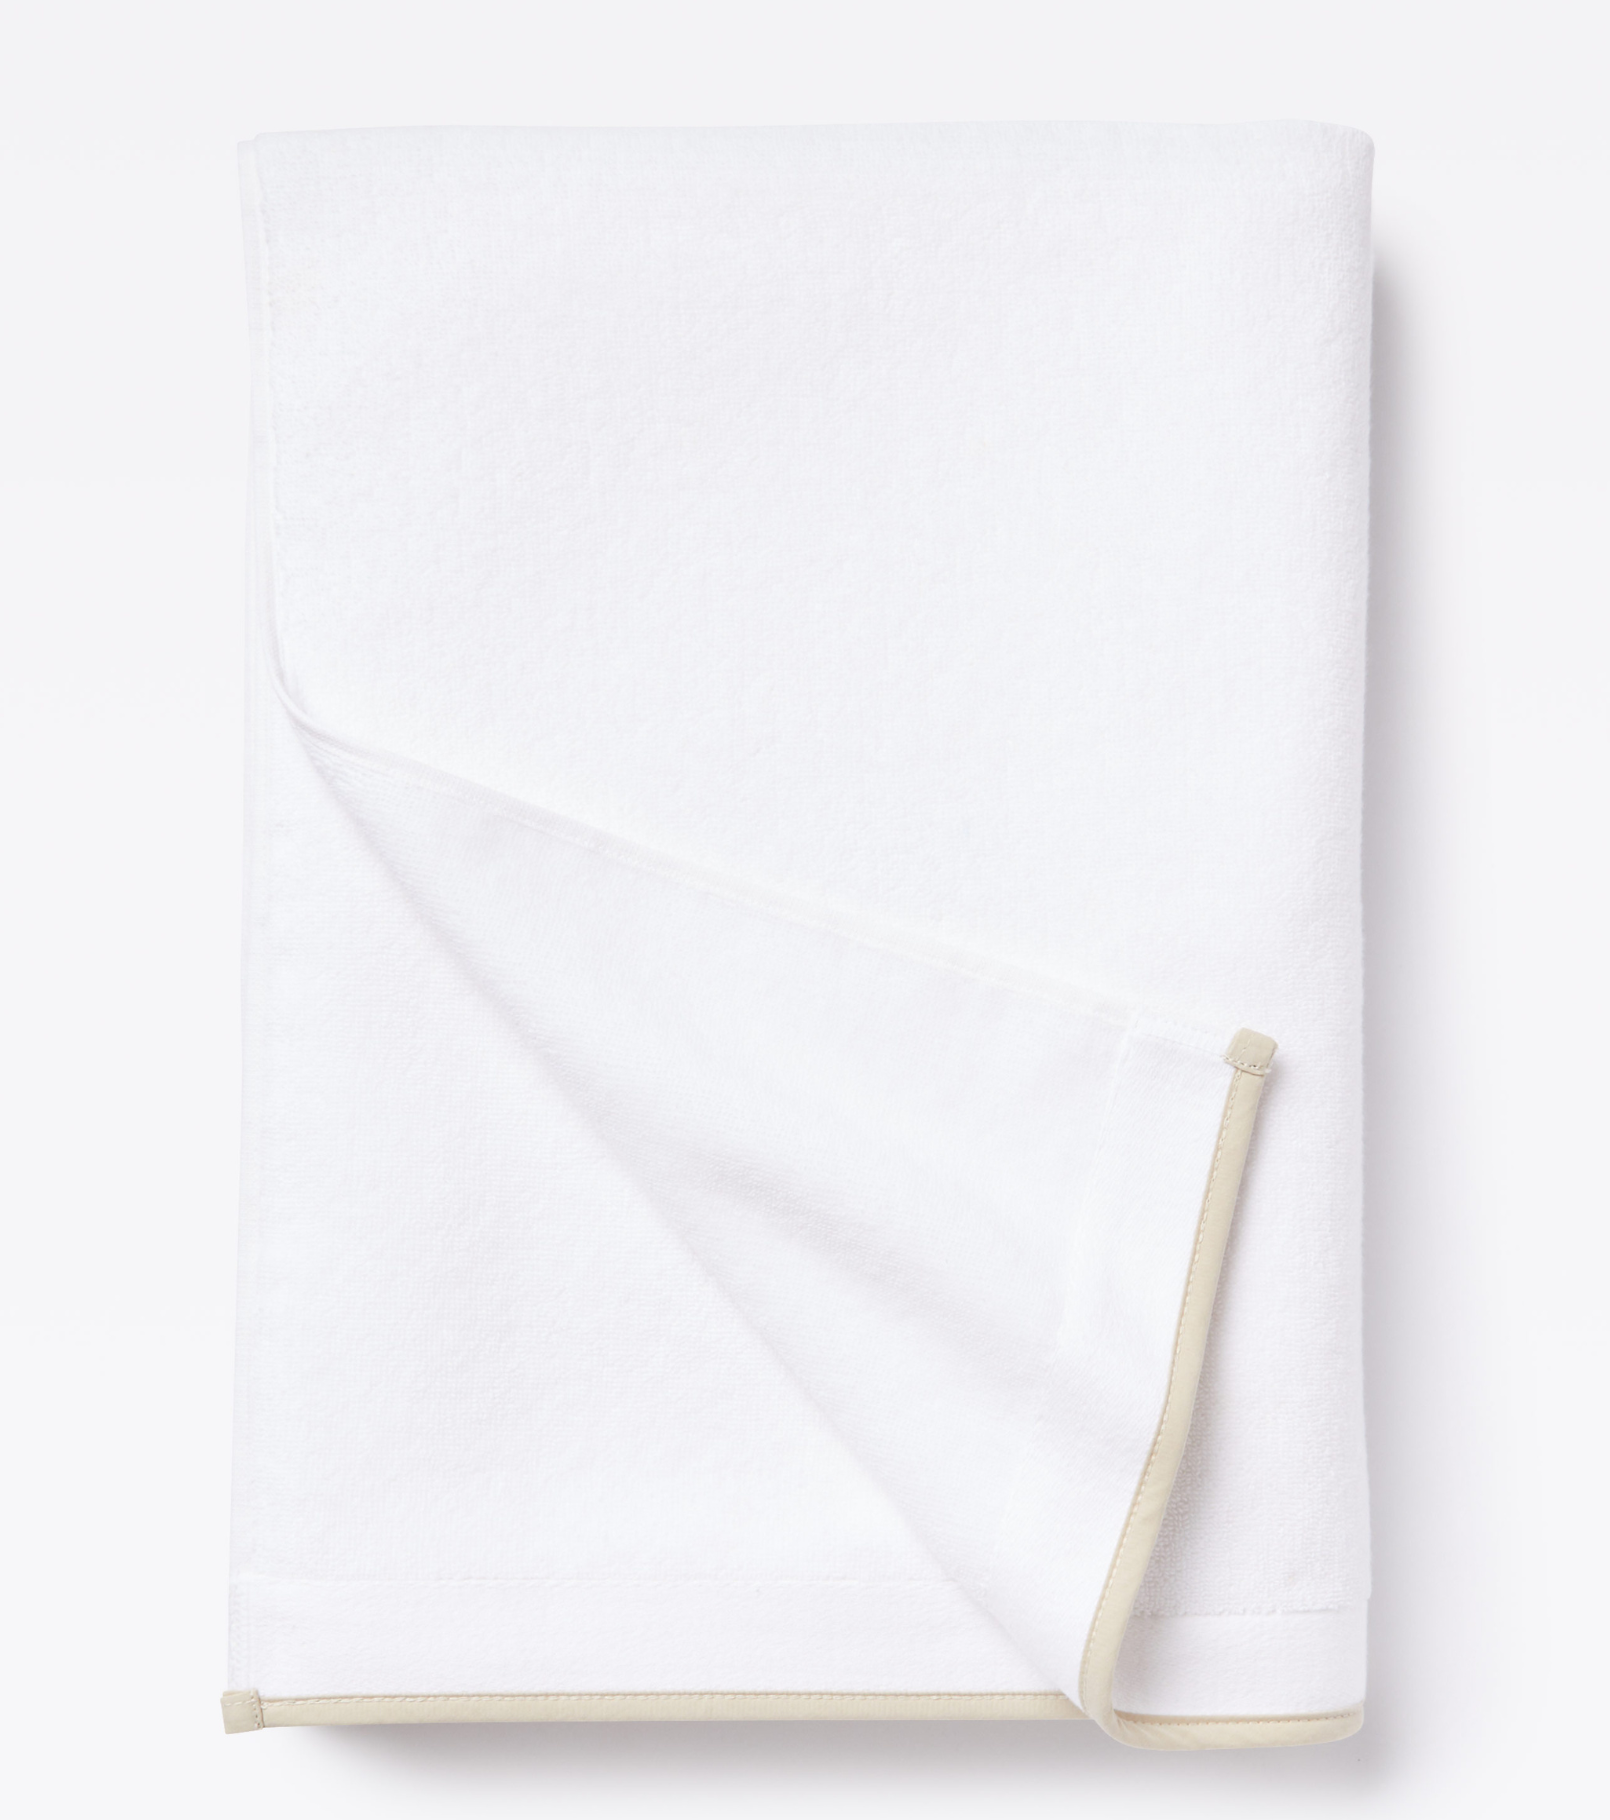 Averylily Border Bath Sheet in White with Sand trim, made from 600-gram weight pure Aegean cotton.